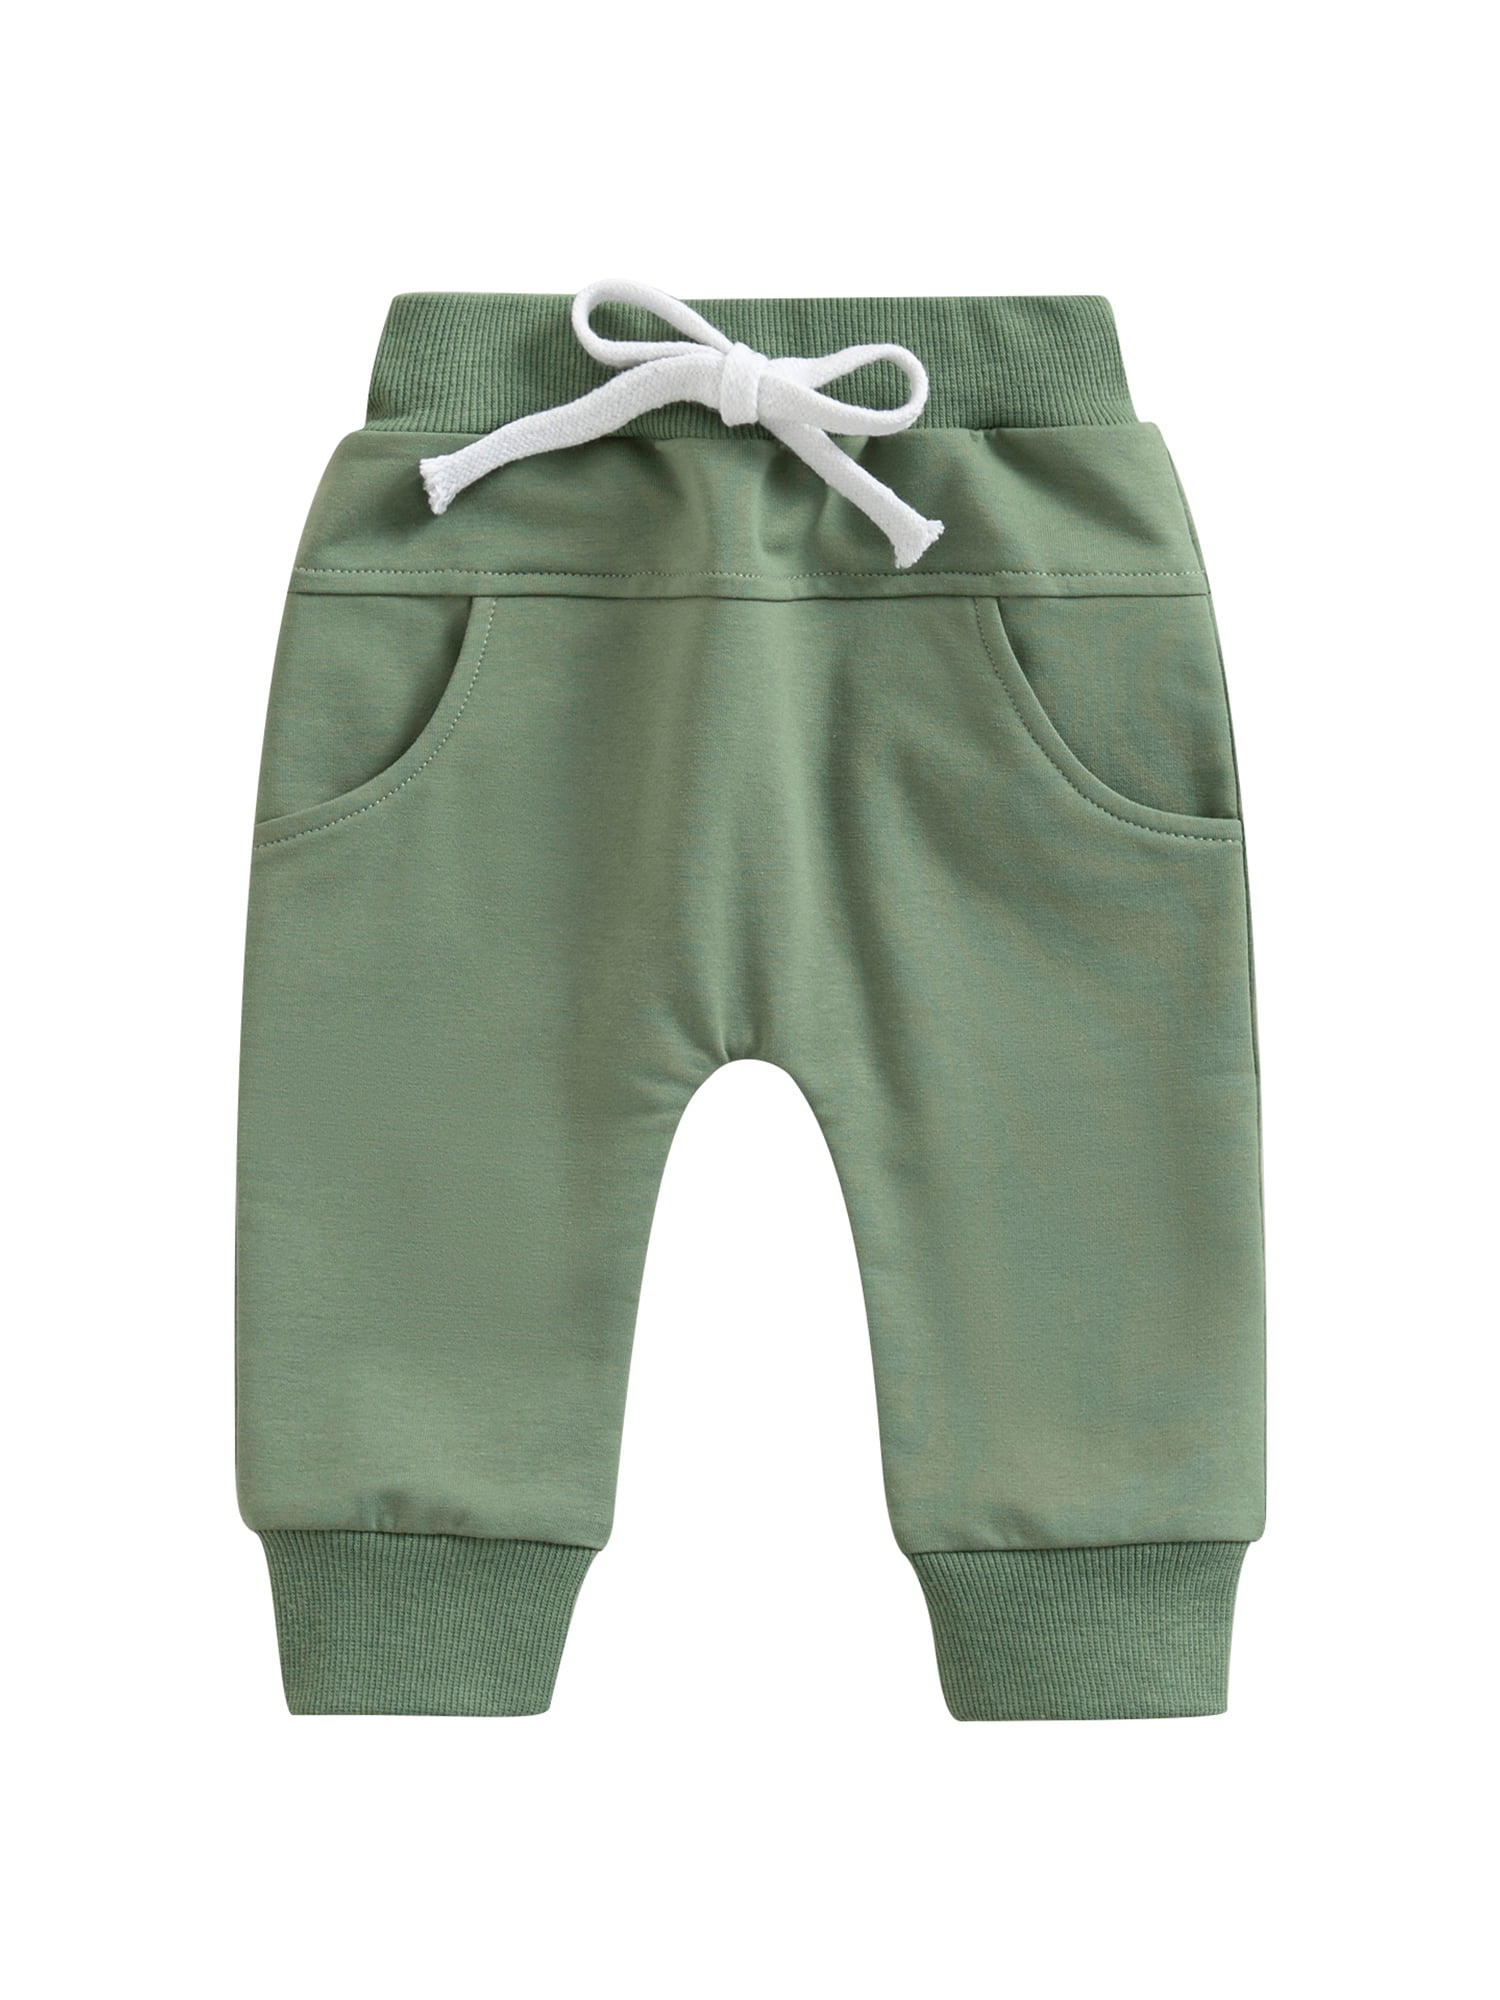 Denim Bay Toddler Boys Cargo Pant with Elastic Waistband and Drawstring,  Sizes 12M-5T 